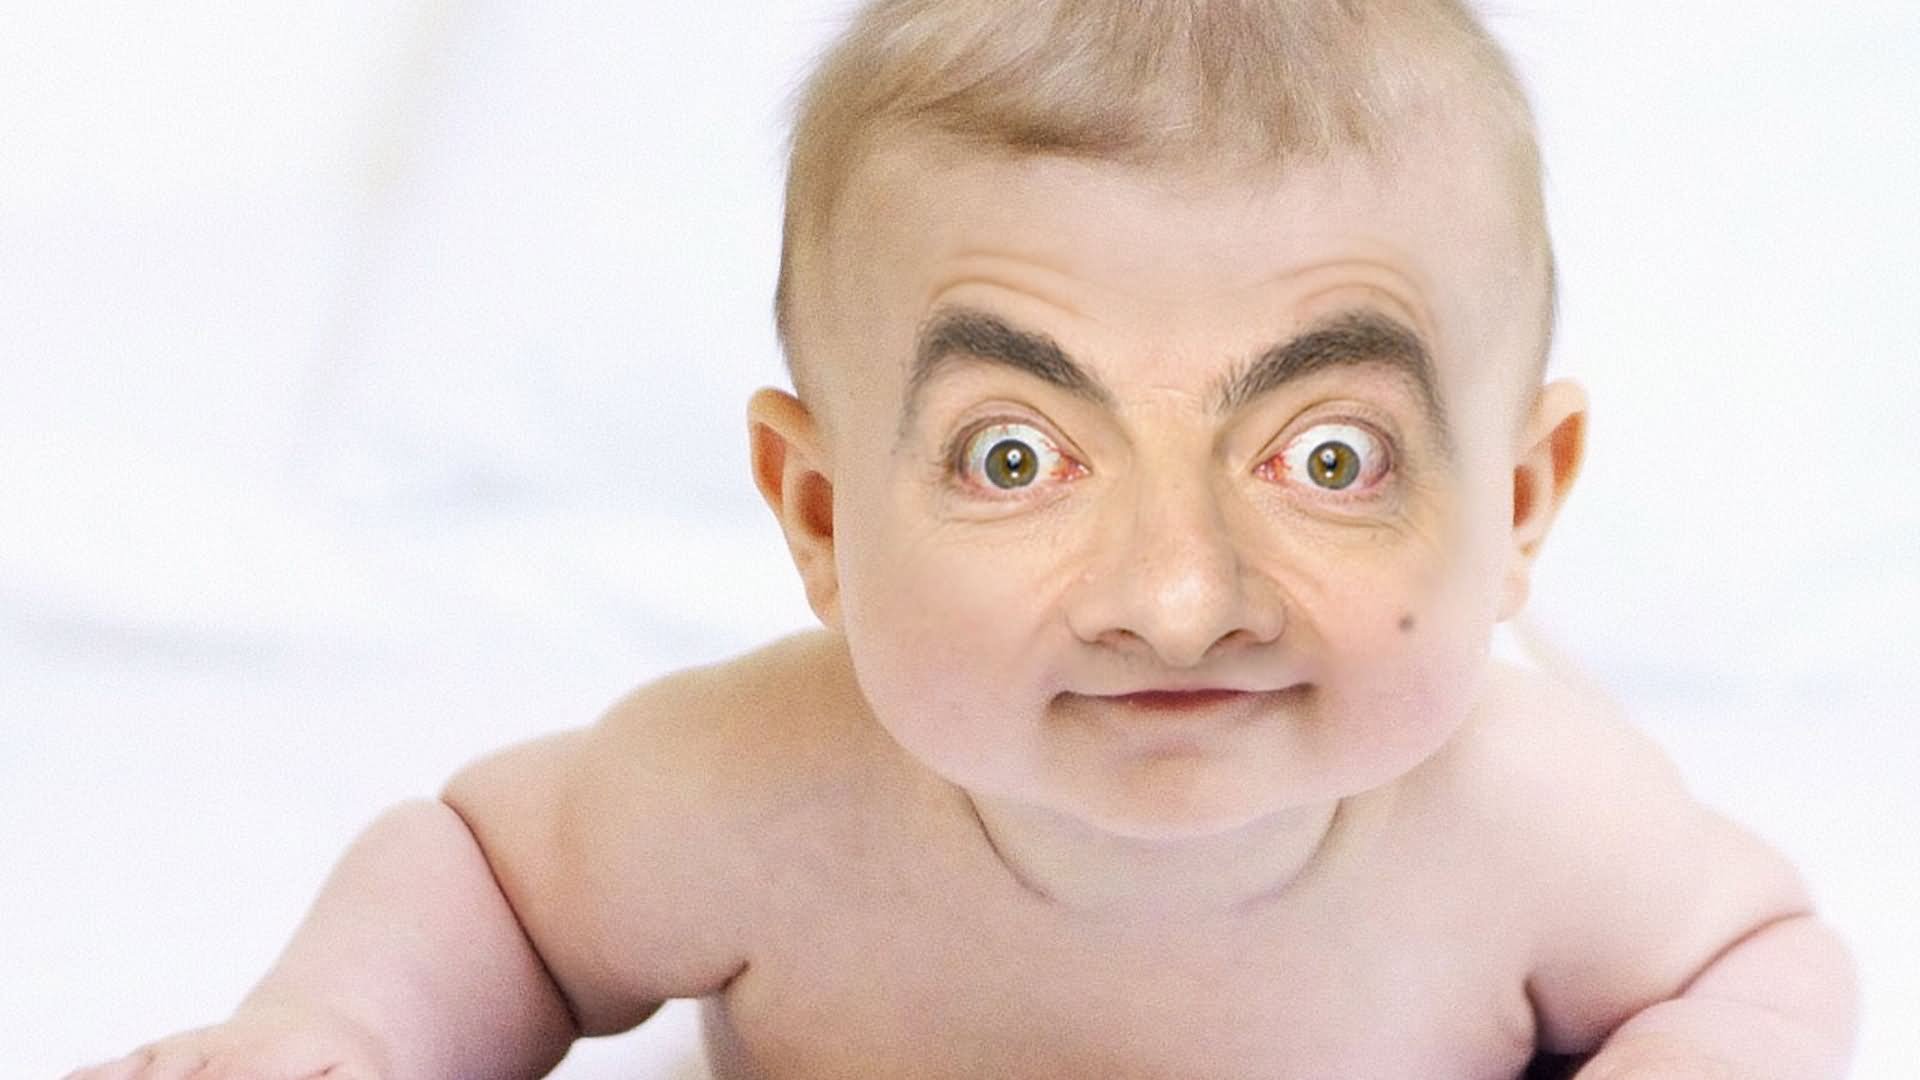 Mr. Bean Funny Baby Face Picture